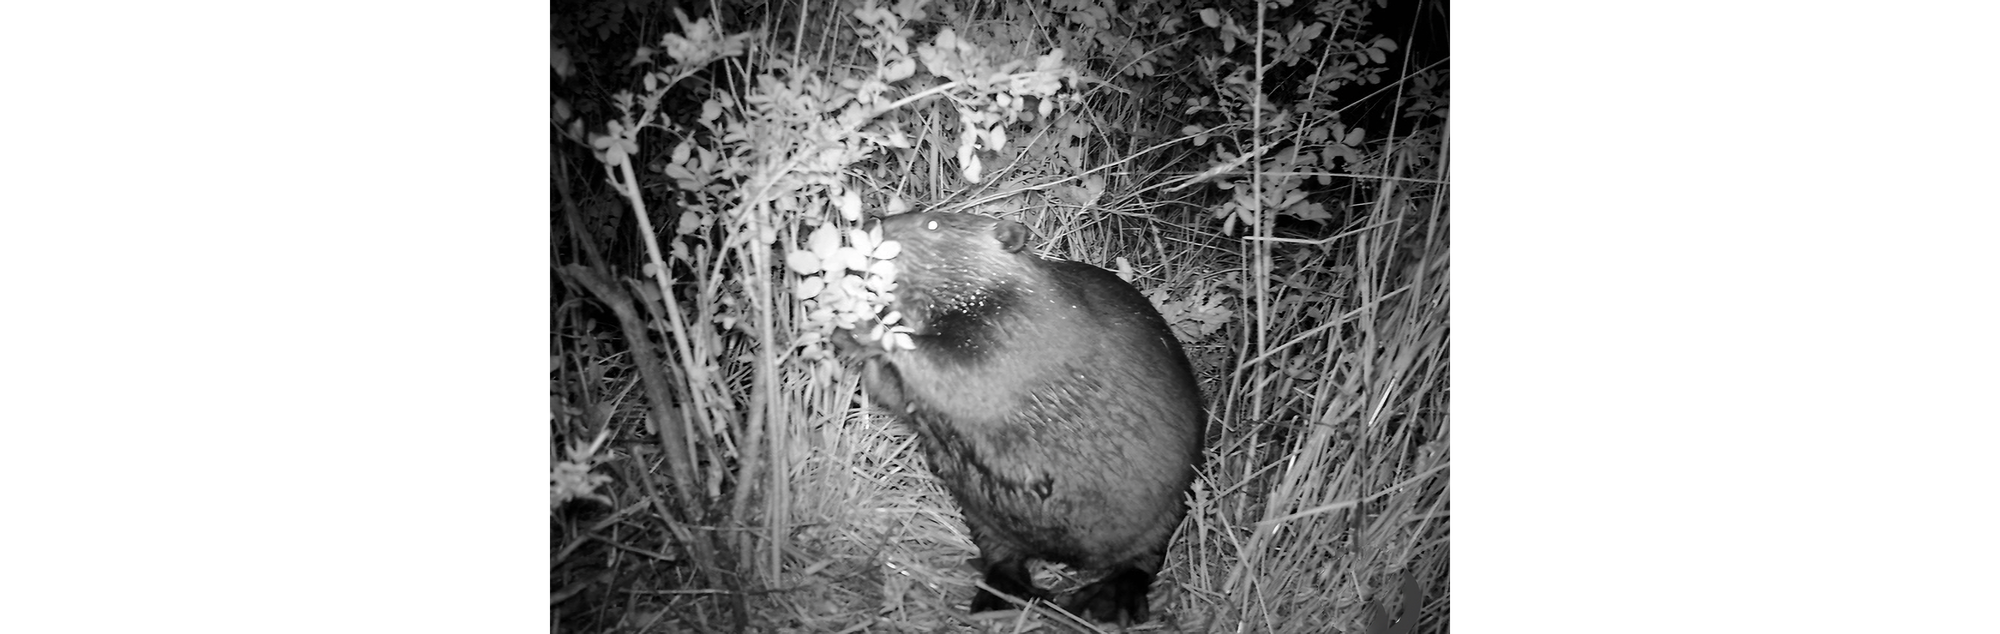 Night photo of beaver eating from a branch